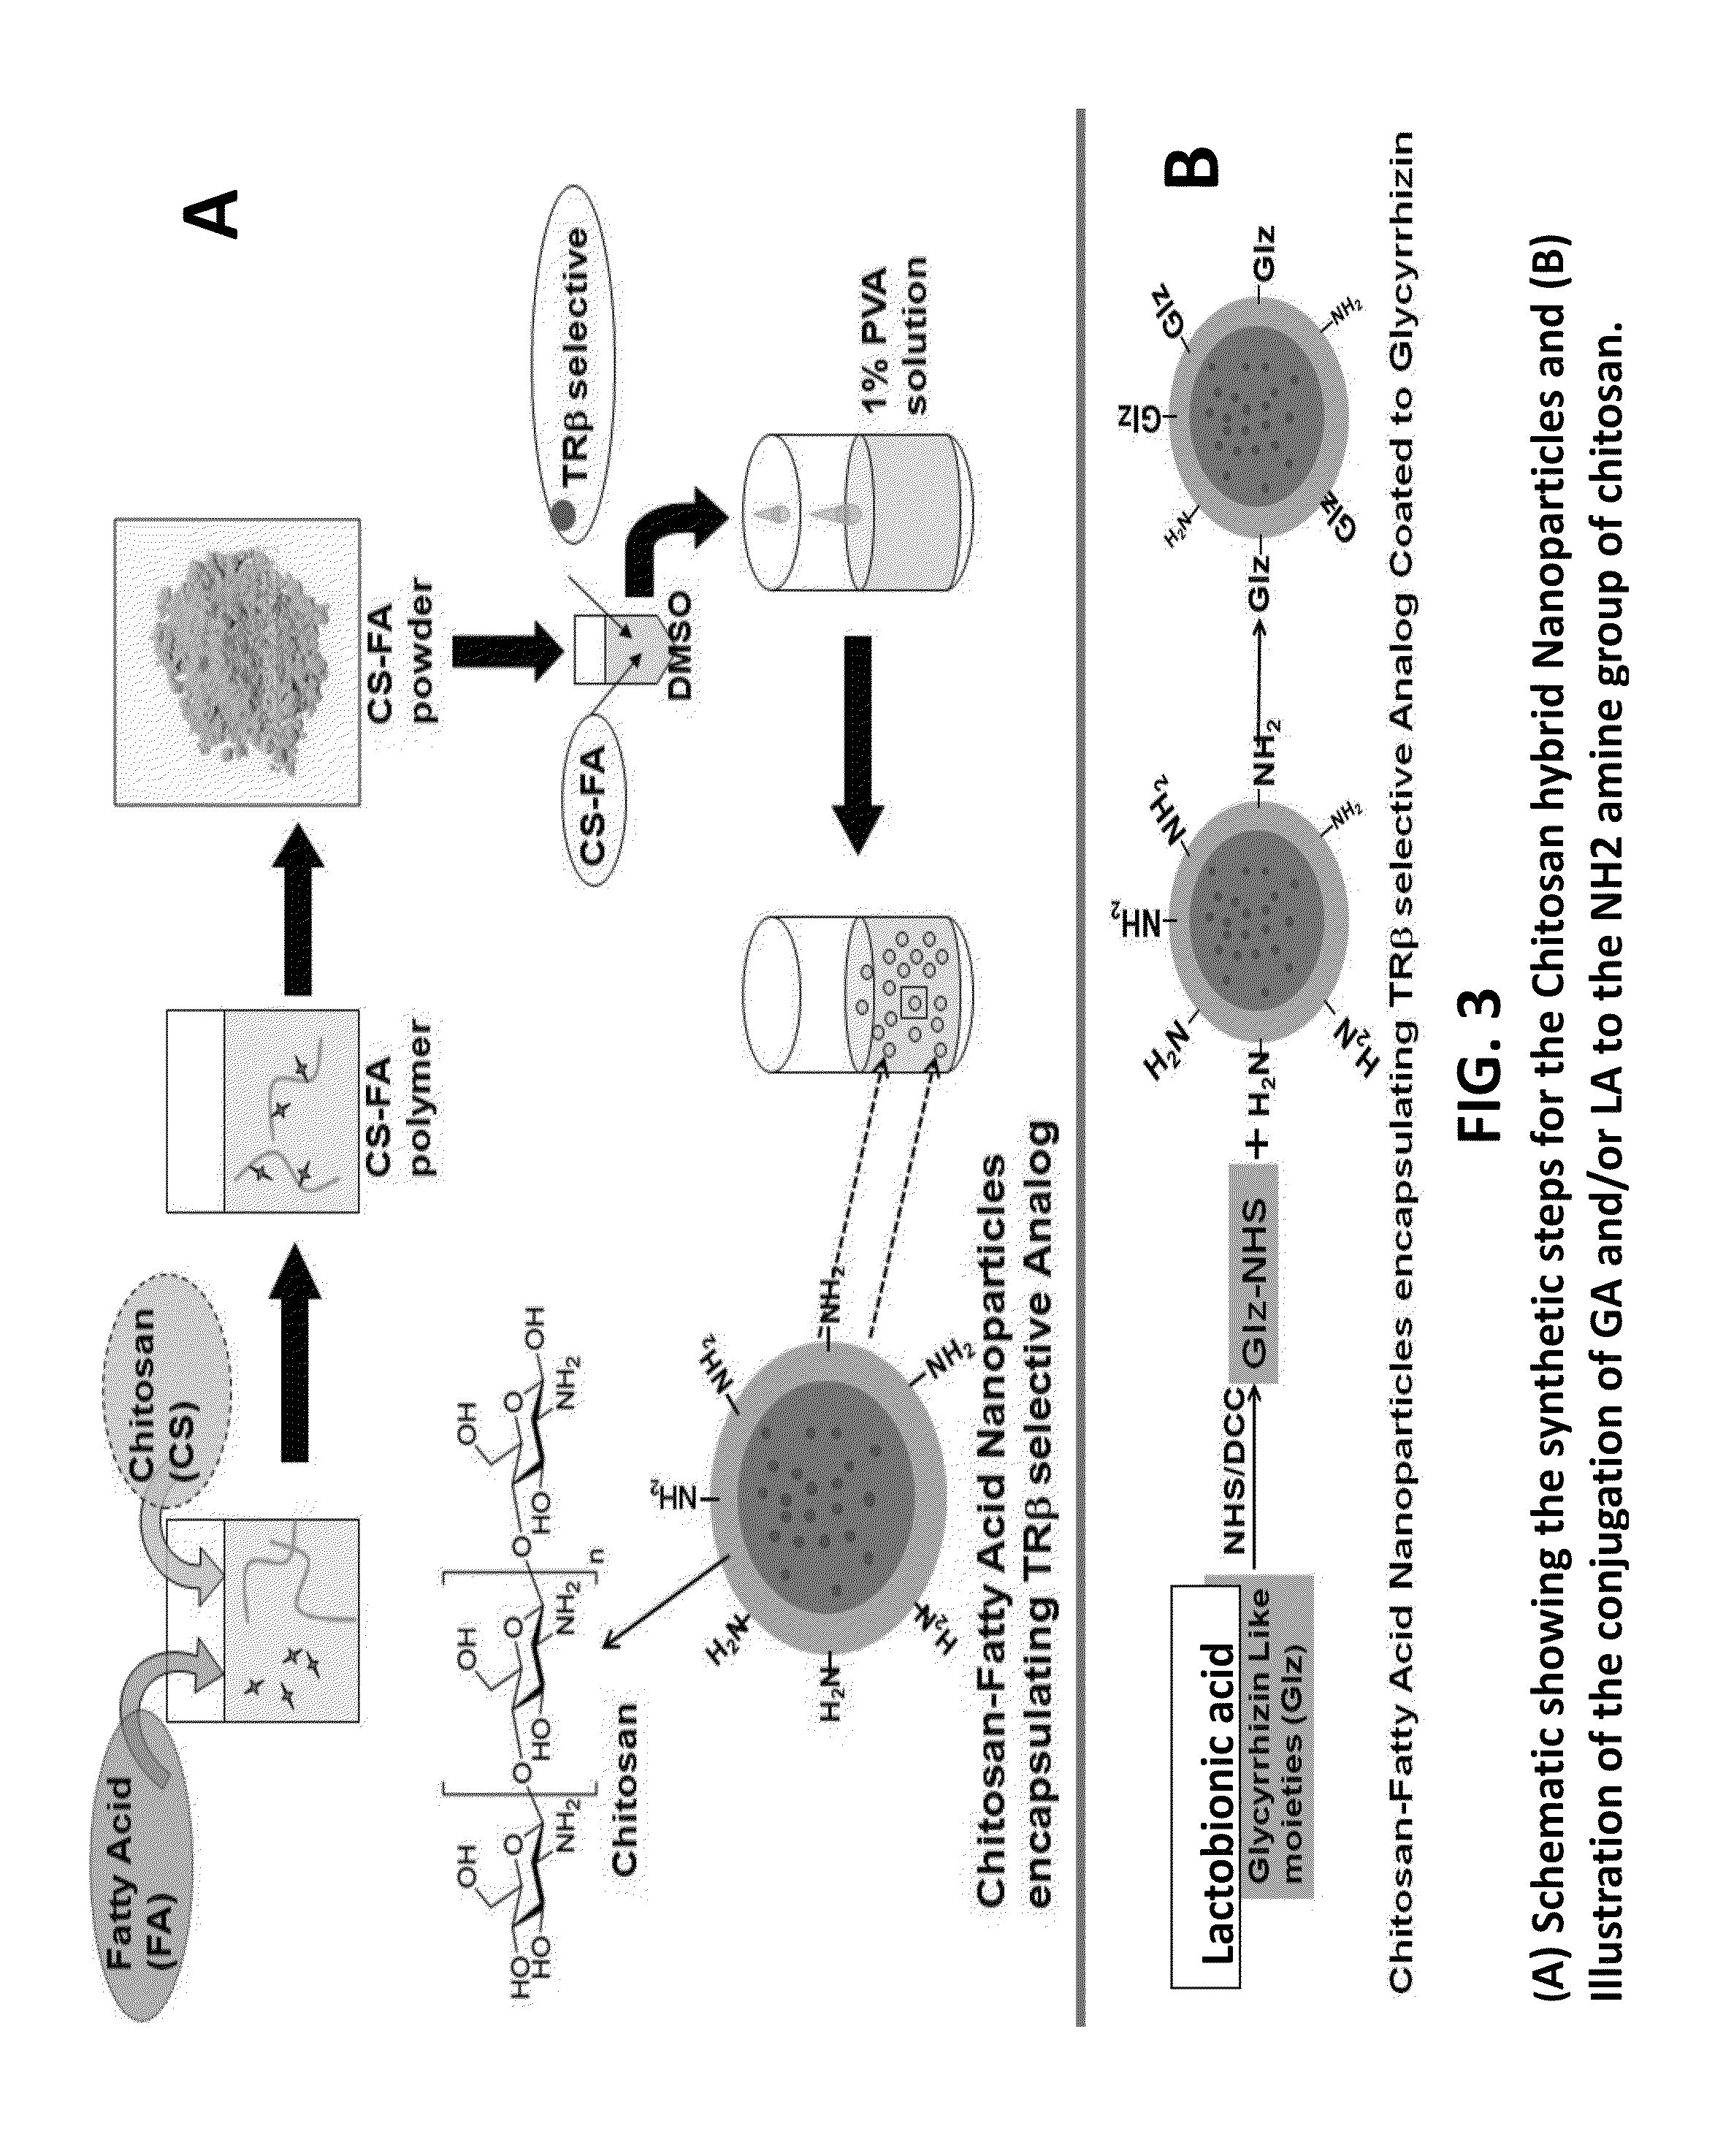 Nanoformulation and methods of use of thyroid receptor beta1 agonists for liver targeting